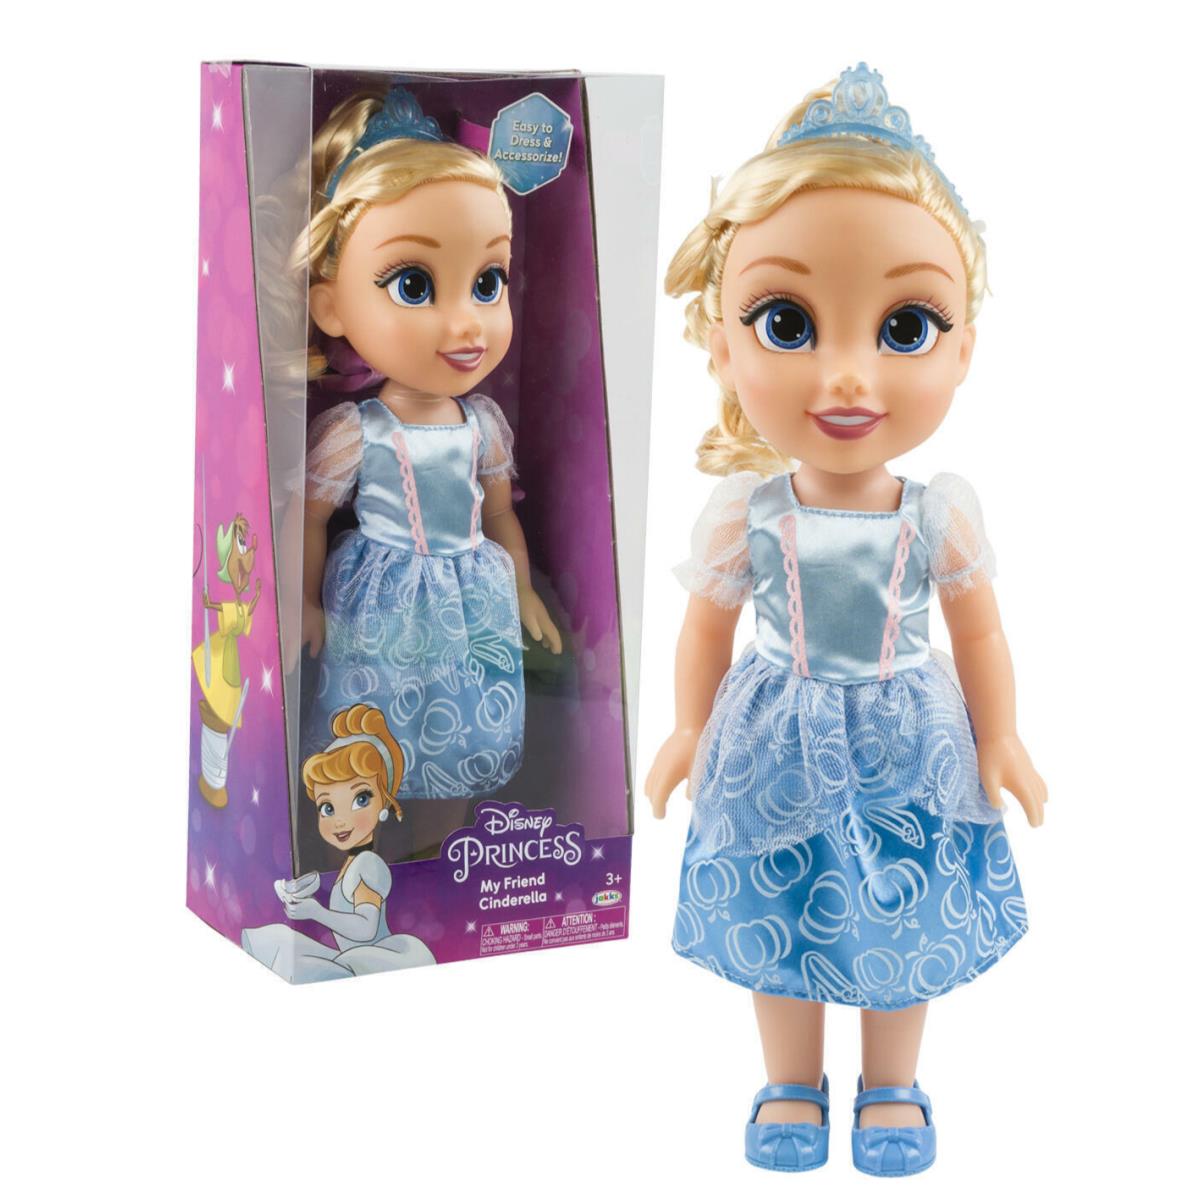 Disney Princess Cinderella Doll 15 Dressed with Matching Shoes